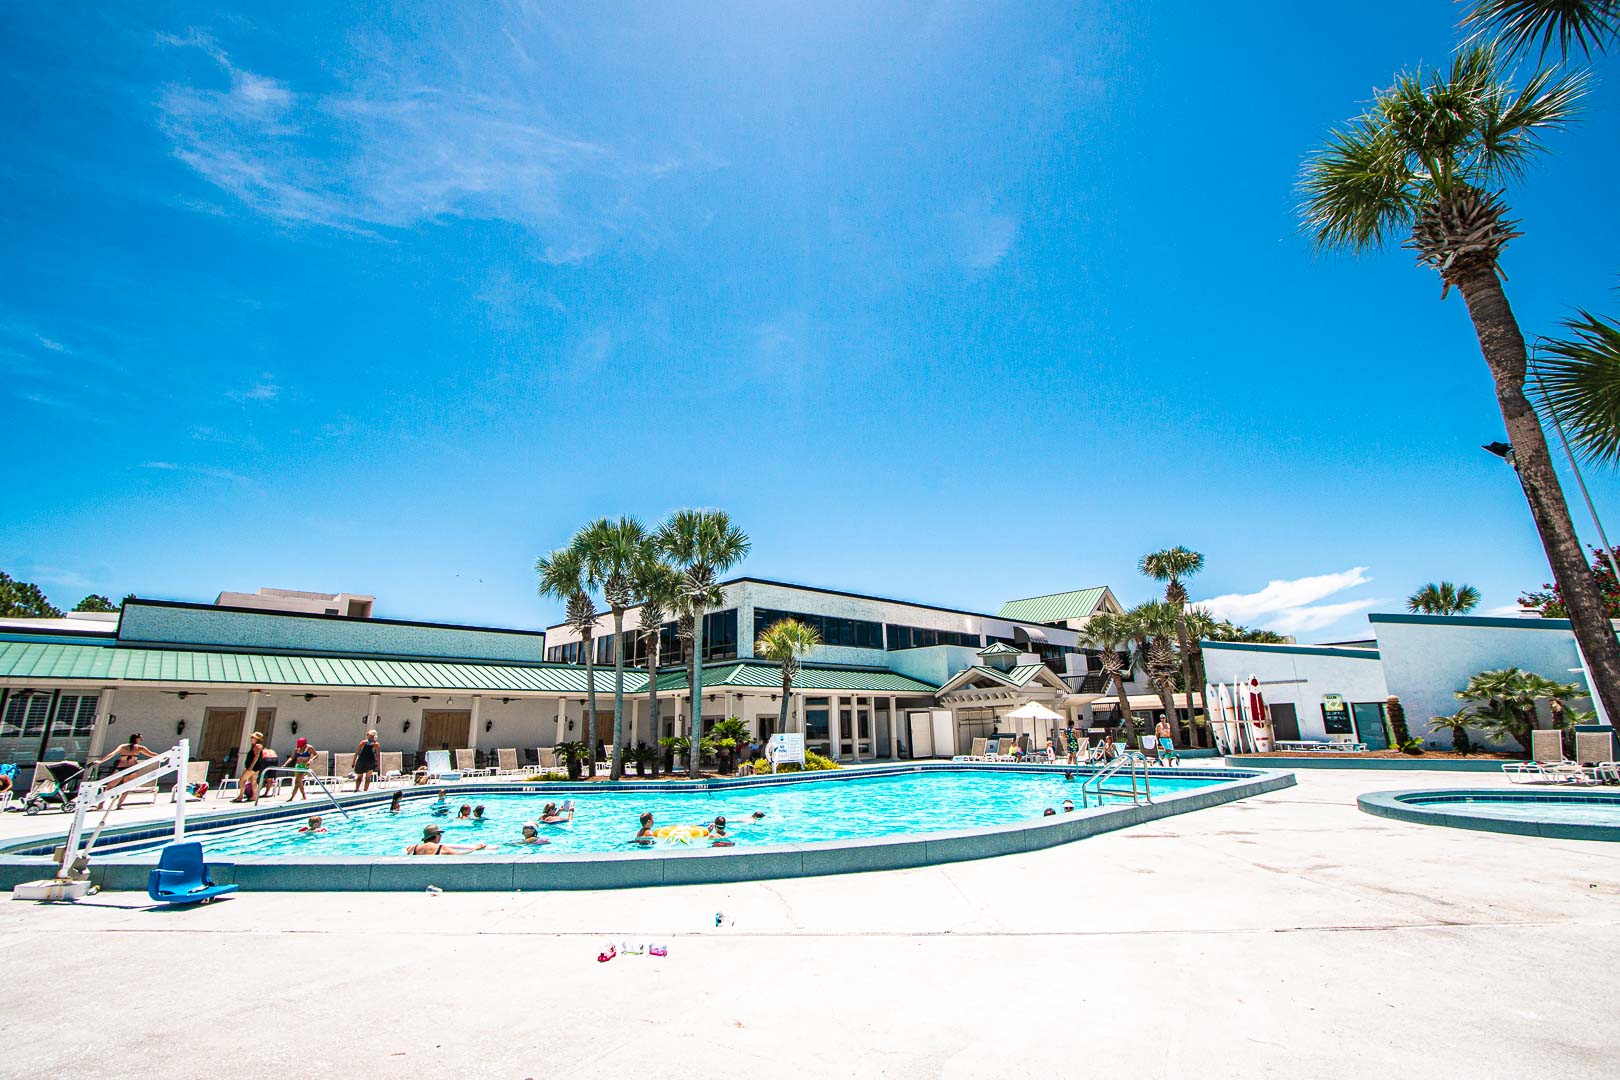 A scenic view of the outdoor swimming pool at VRI's Bay Club of Sandestin in Florida.